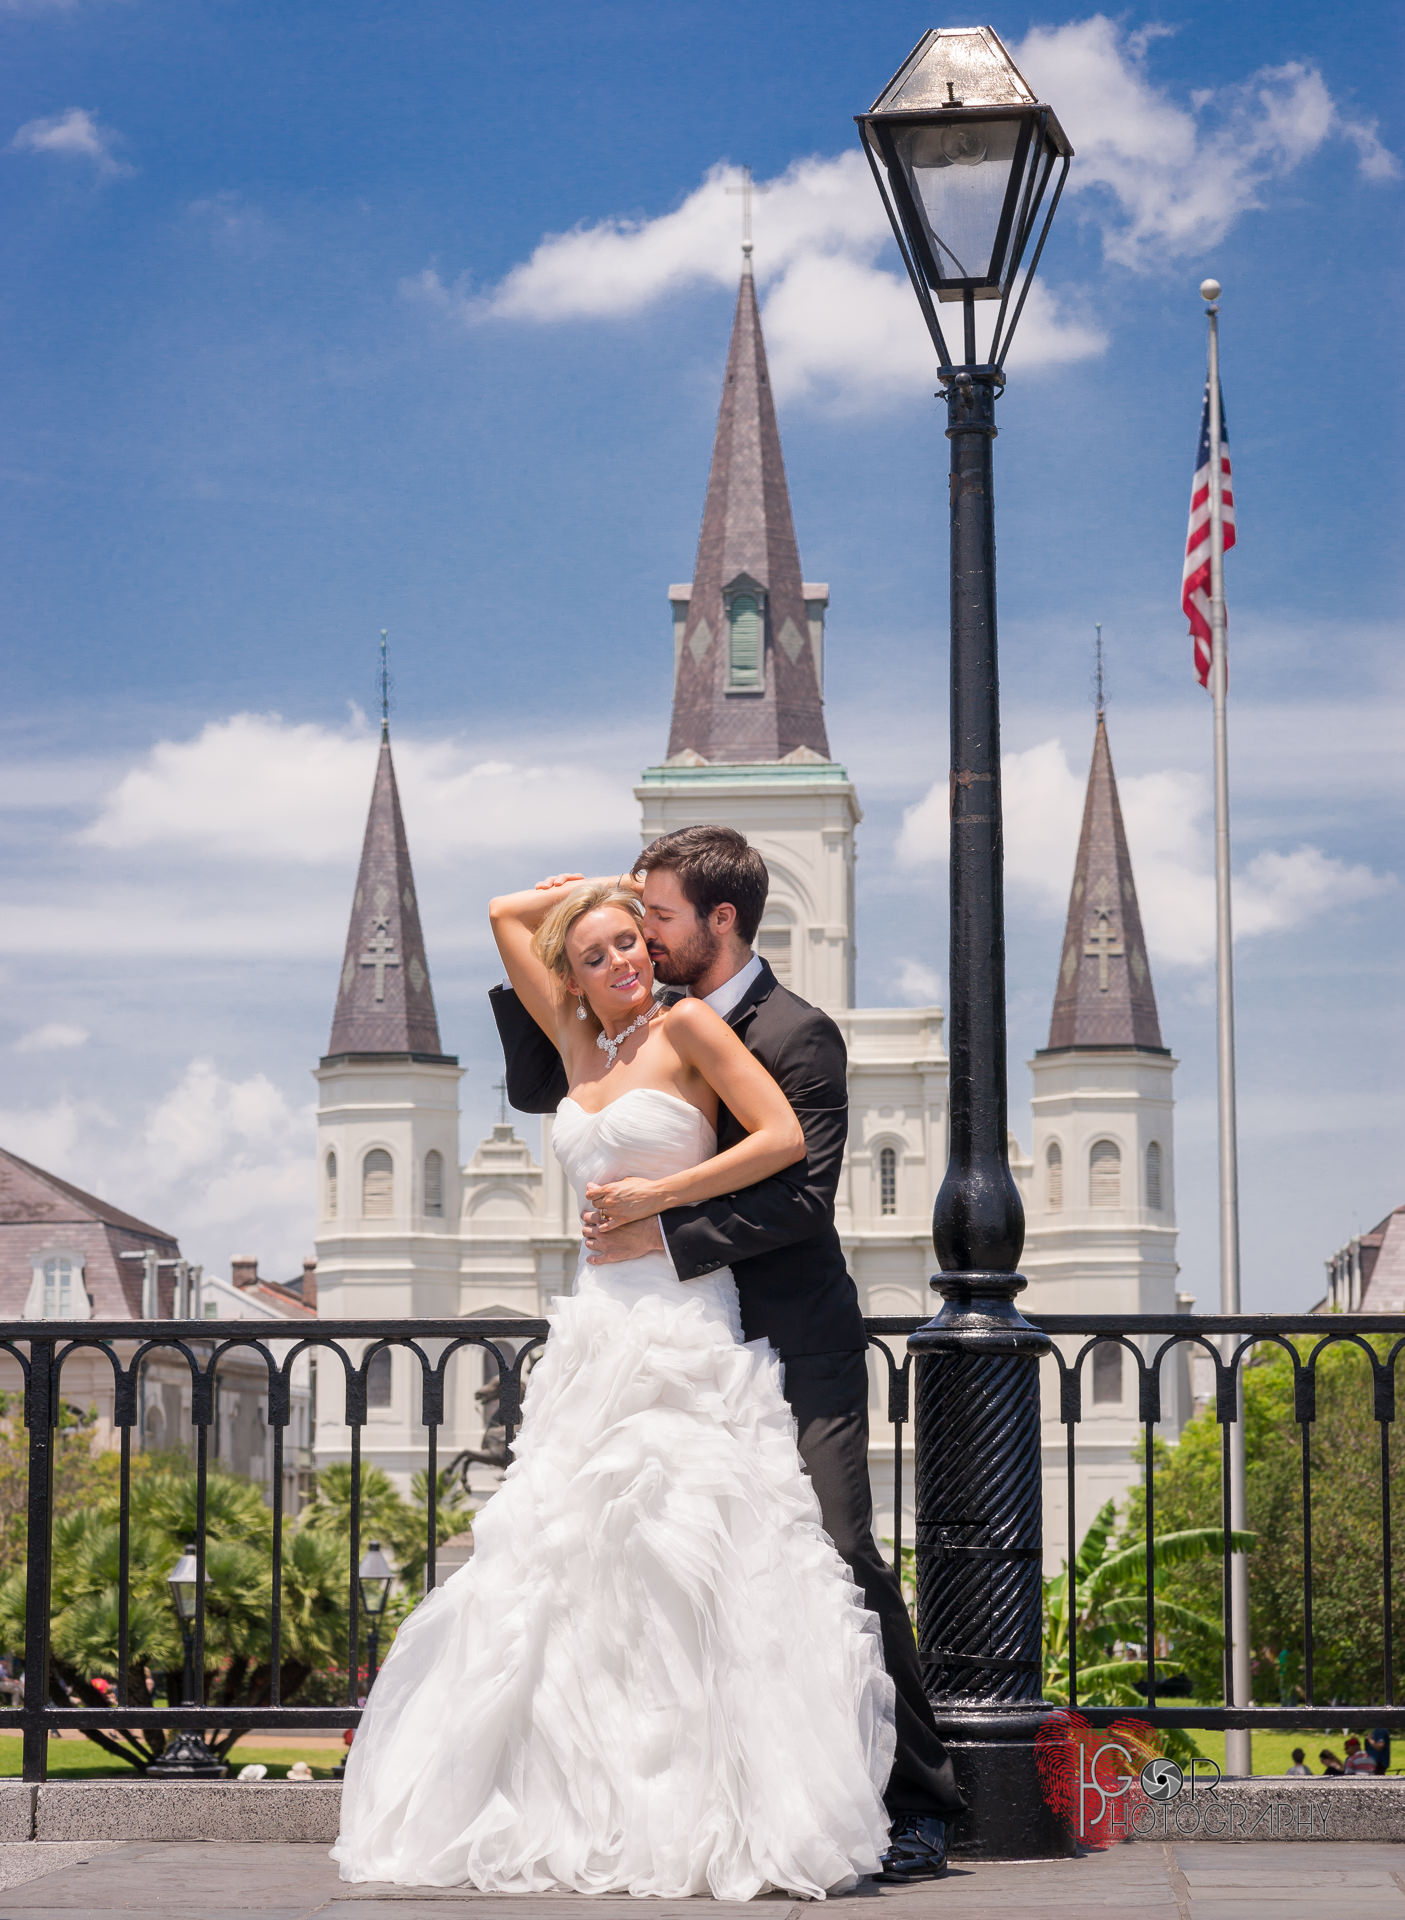 Wedding photography in New Orleans